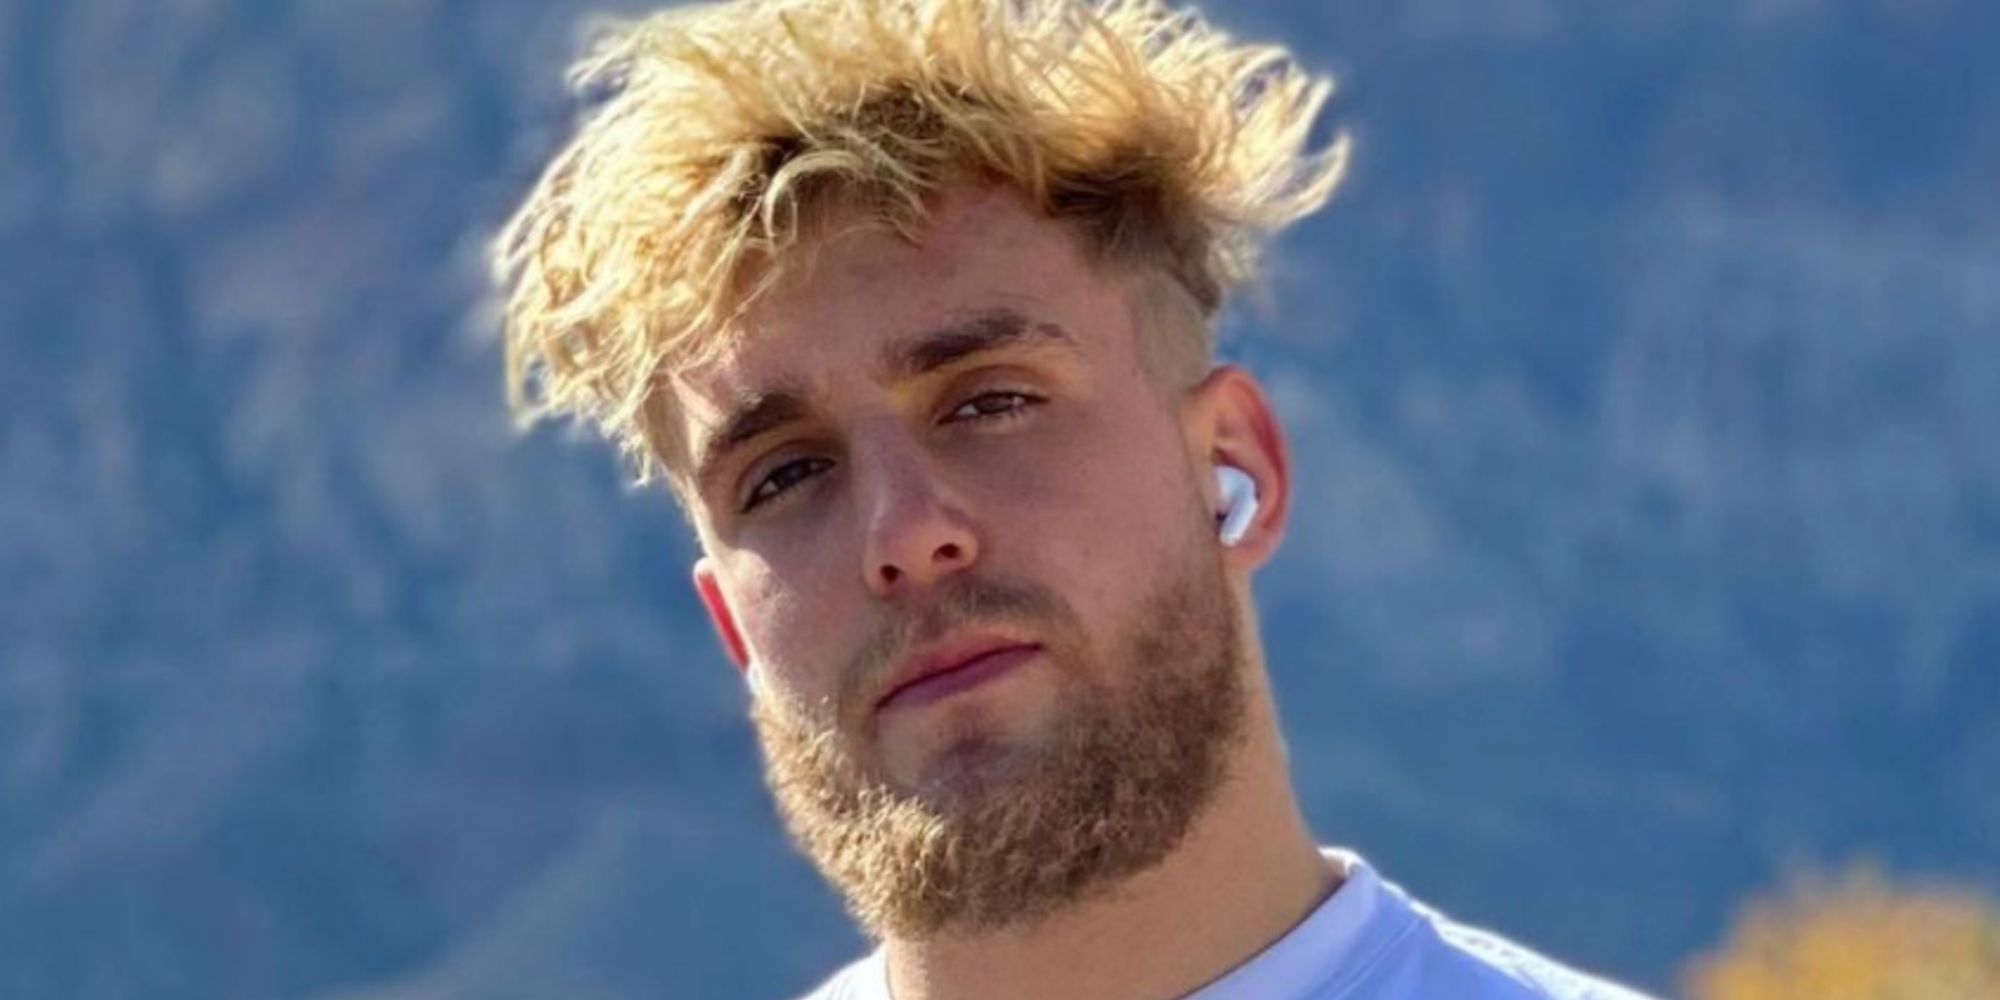 Jake Paul Profile Pic - YouTuber Jake Paul Criminally Charged by Police